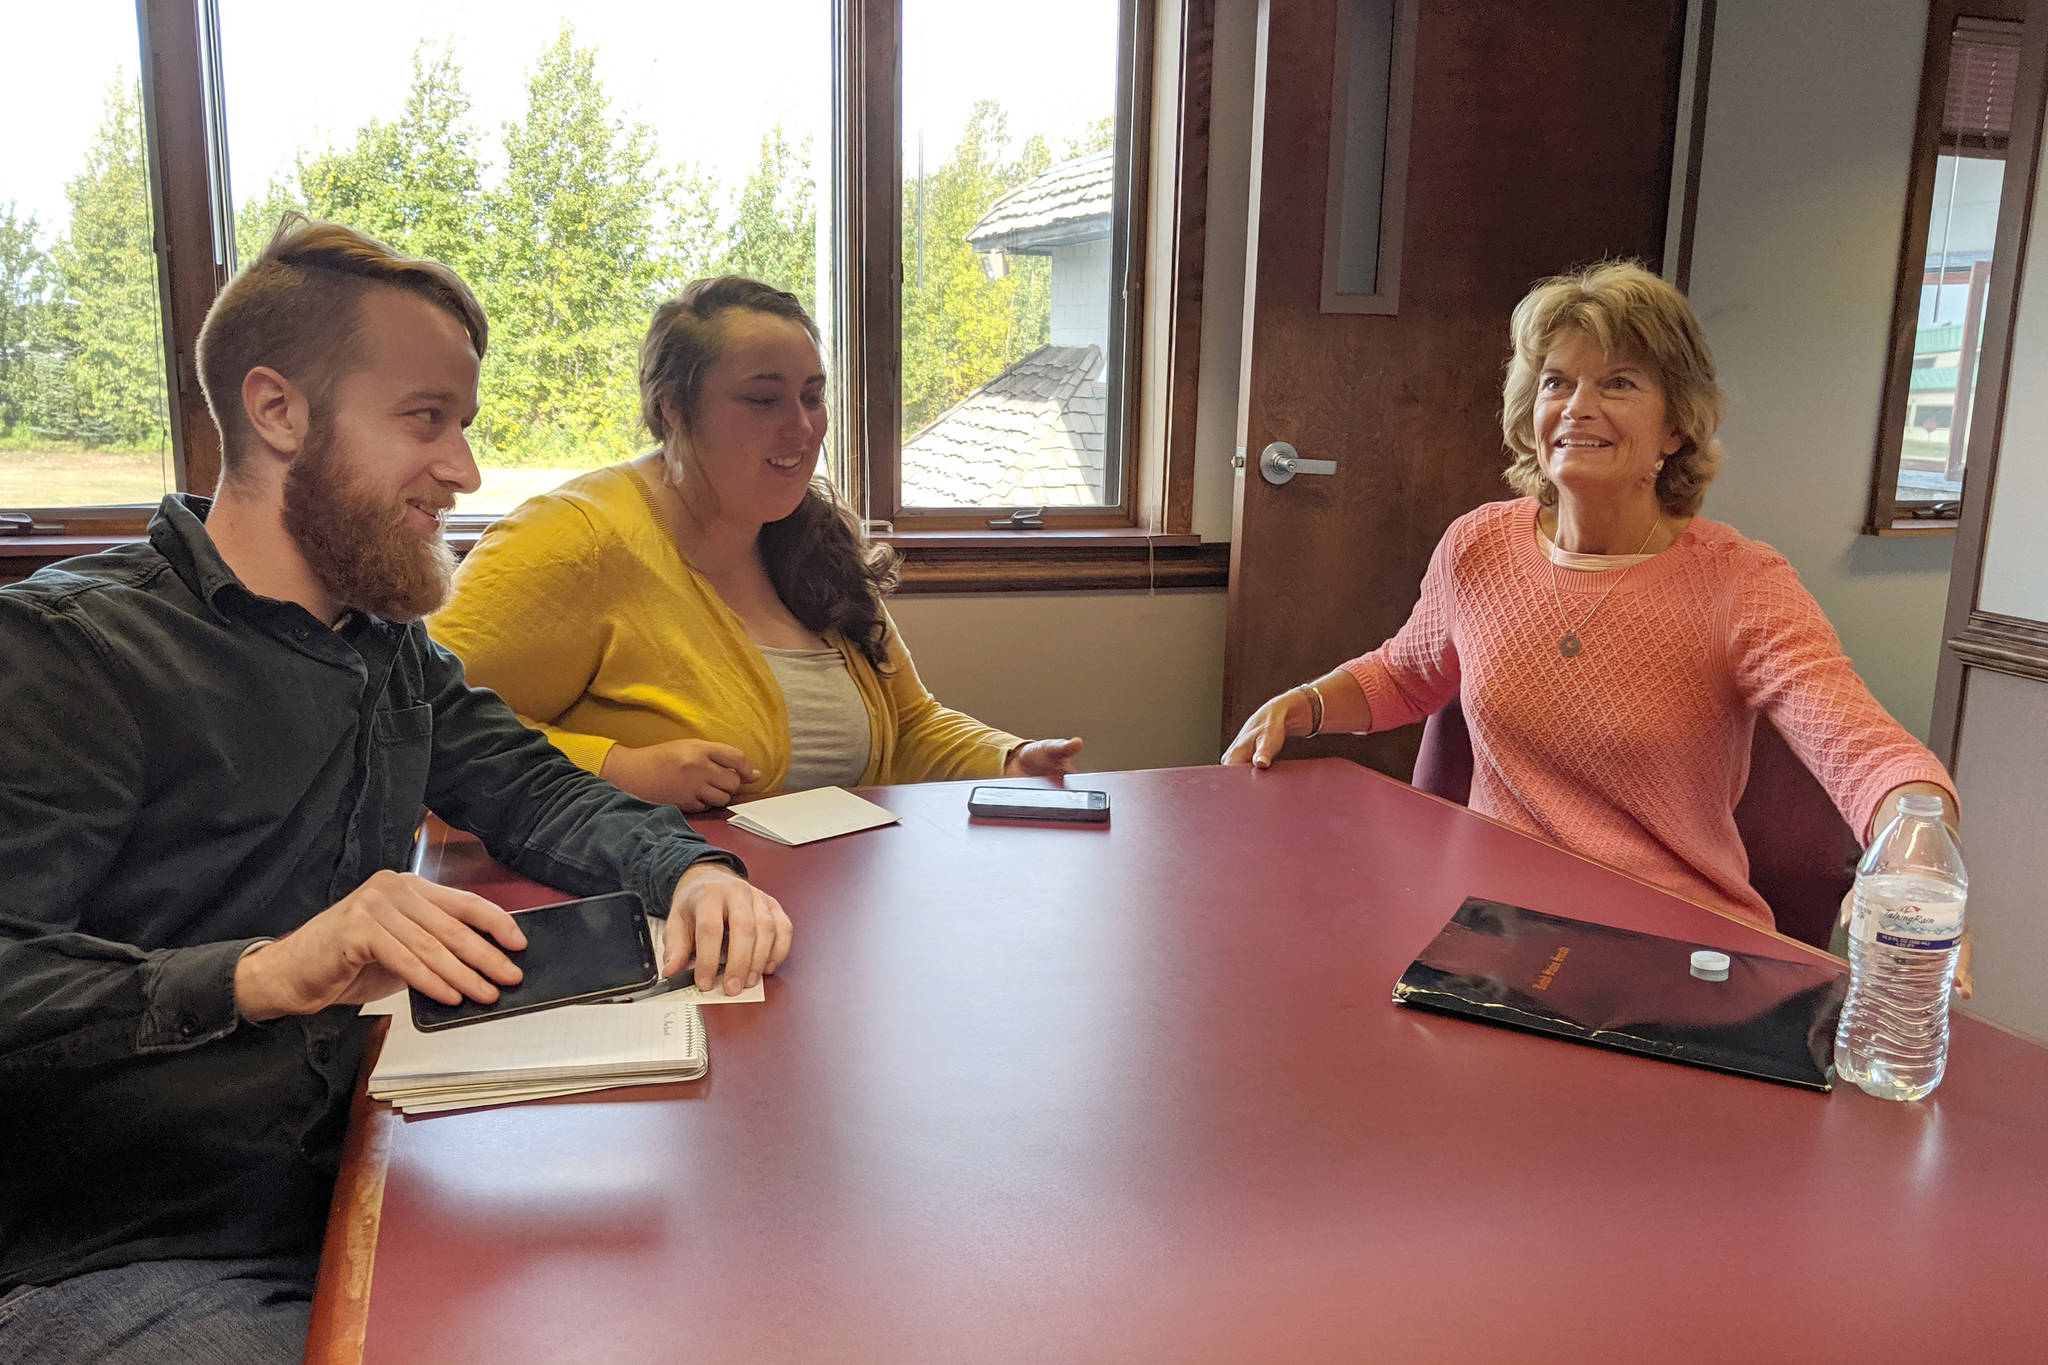 Clarion reporters Brian Mazurek, left, and Victoria Petersen interview Sen. Lisa Murkowski, R-Alaska, at the Peninsula Clarion in Kenai, Alaska, on Wednesday, Aug. 14, 2019. Murkowski discussed issues such as the Alaska Permanent Fund dividend, the Pebble Mine project and Alaska-related legislation. (Photo by Erin Thompson/Peninsula Clarion)